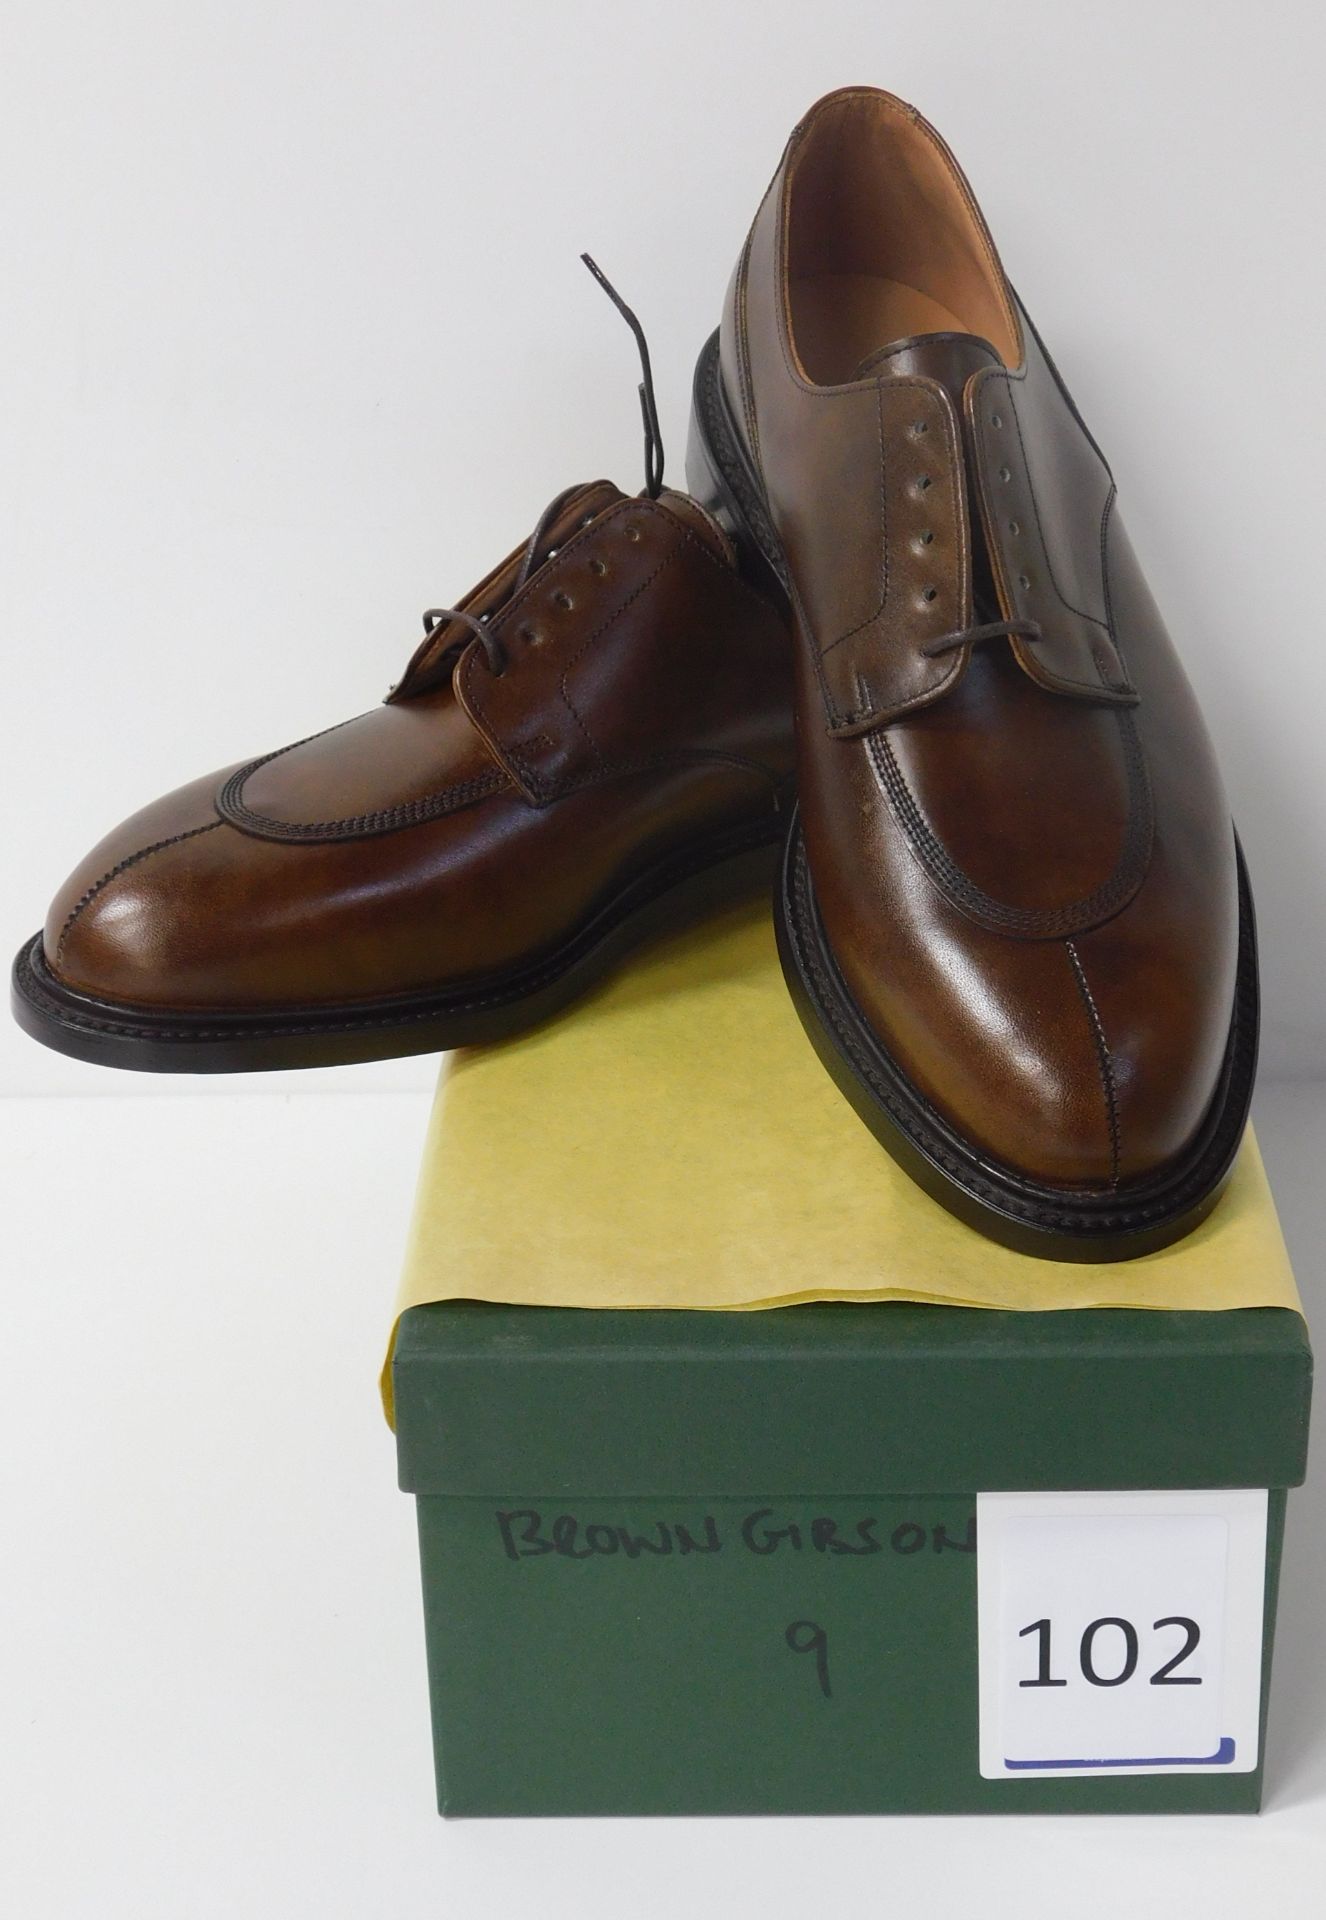 Pair of Alfred Sargent Brown Gibson, Size 9 (Slight Seconds) (Location: Brentwood - See General